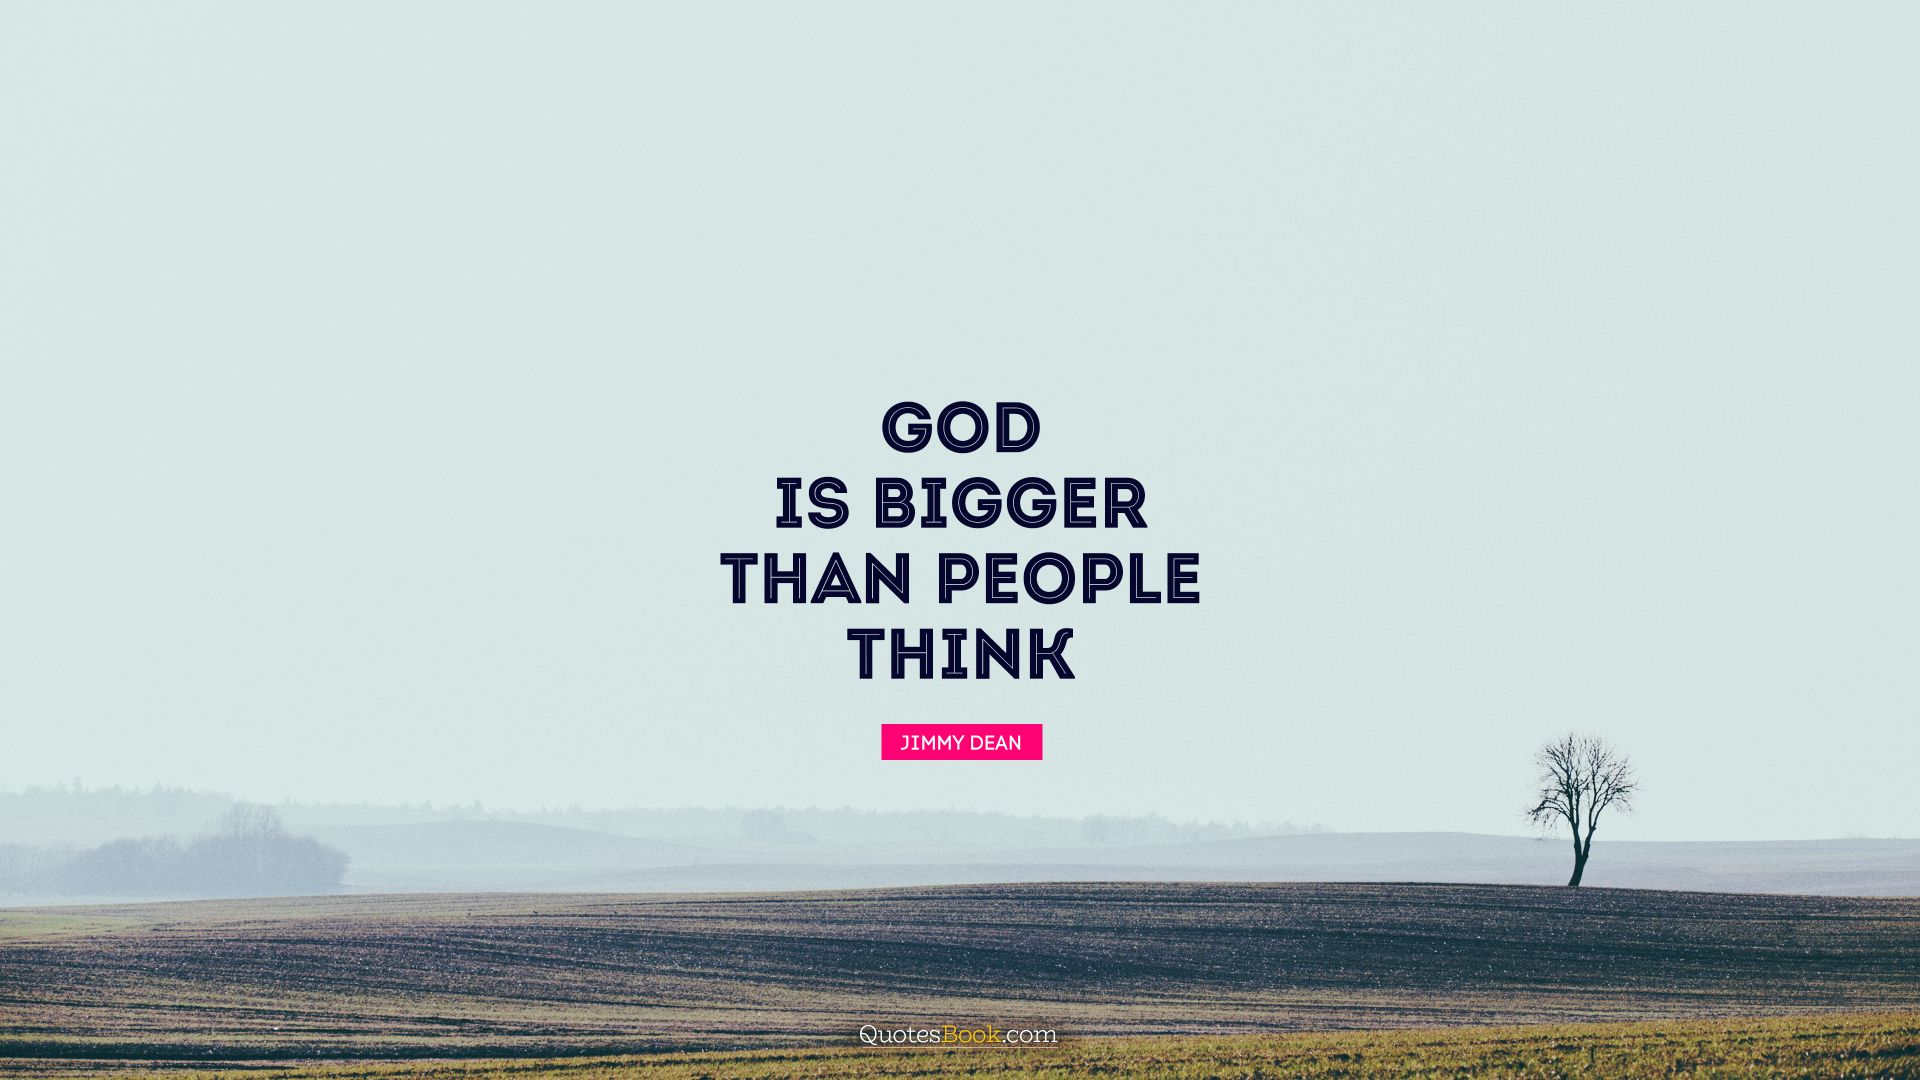 God is bigger than people think. - Quote by Jimmy Dean